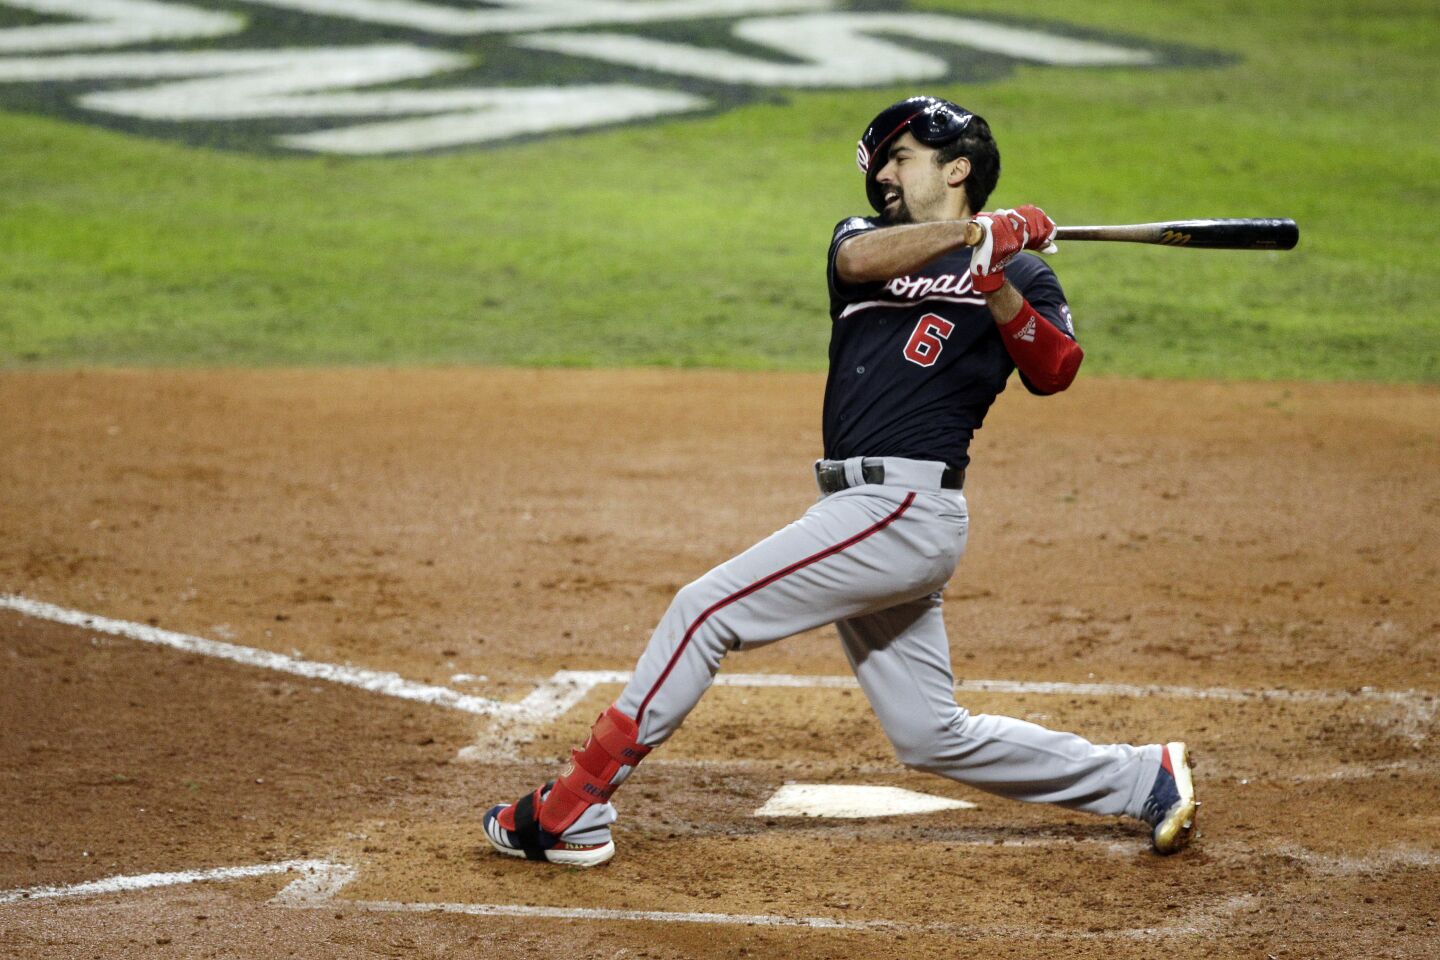 Washington Nationals third baseman Anthony Rendon swings and misses to strike out.